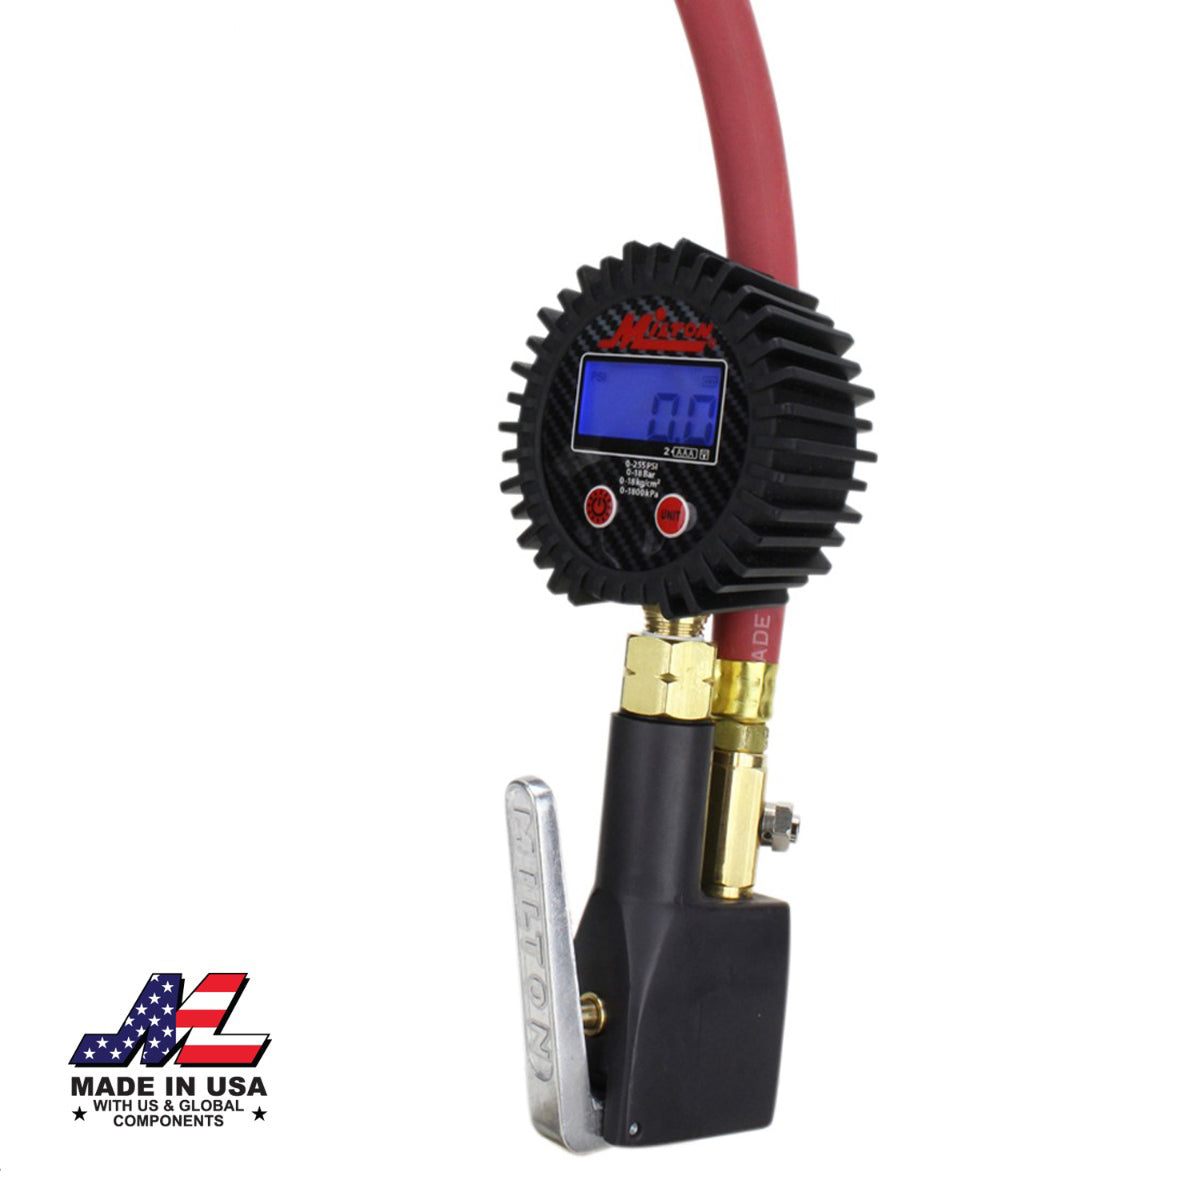 S-530 Compact Digital Tire Inflator with Pressure Gauge (255 PSI) - Air Chuck & 15